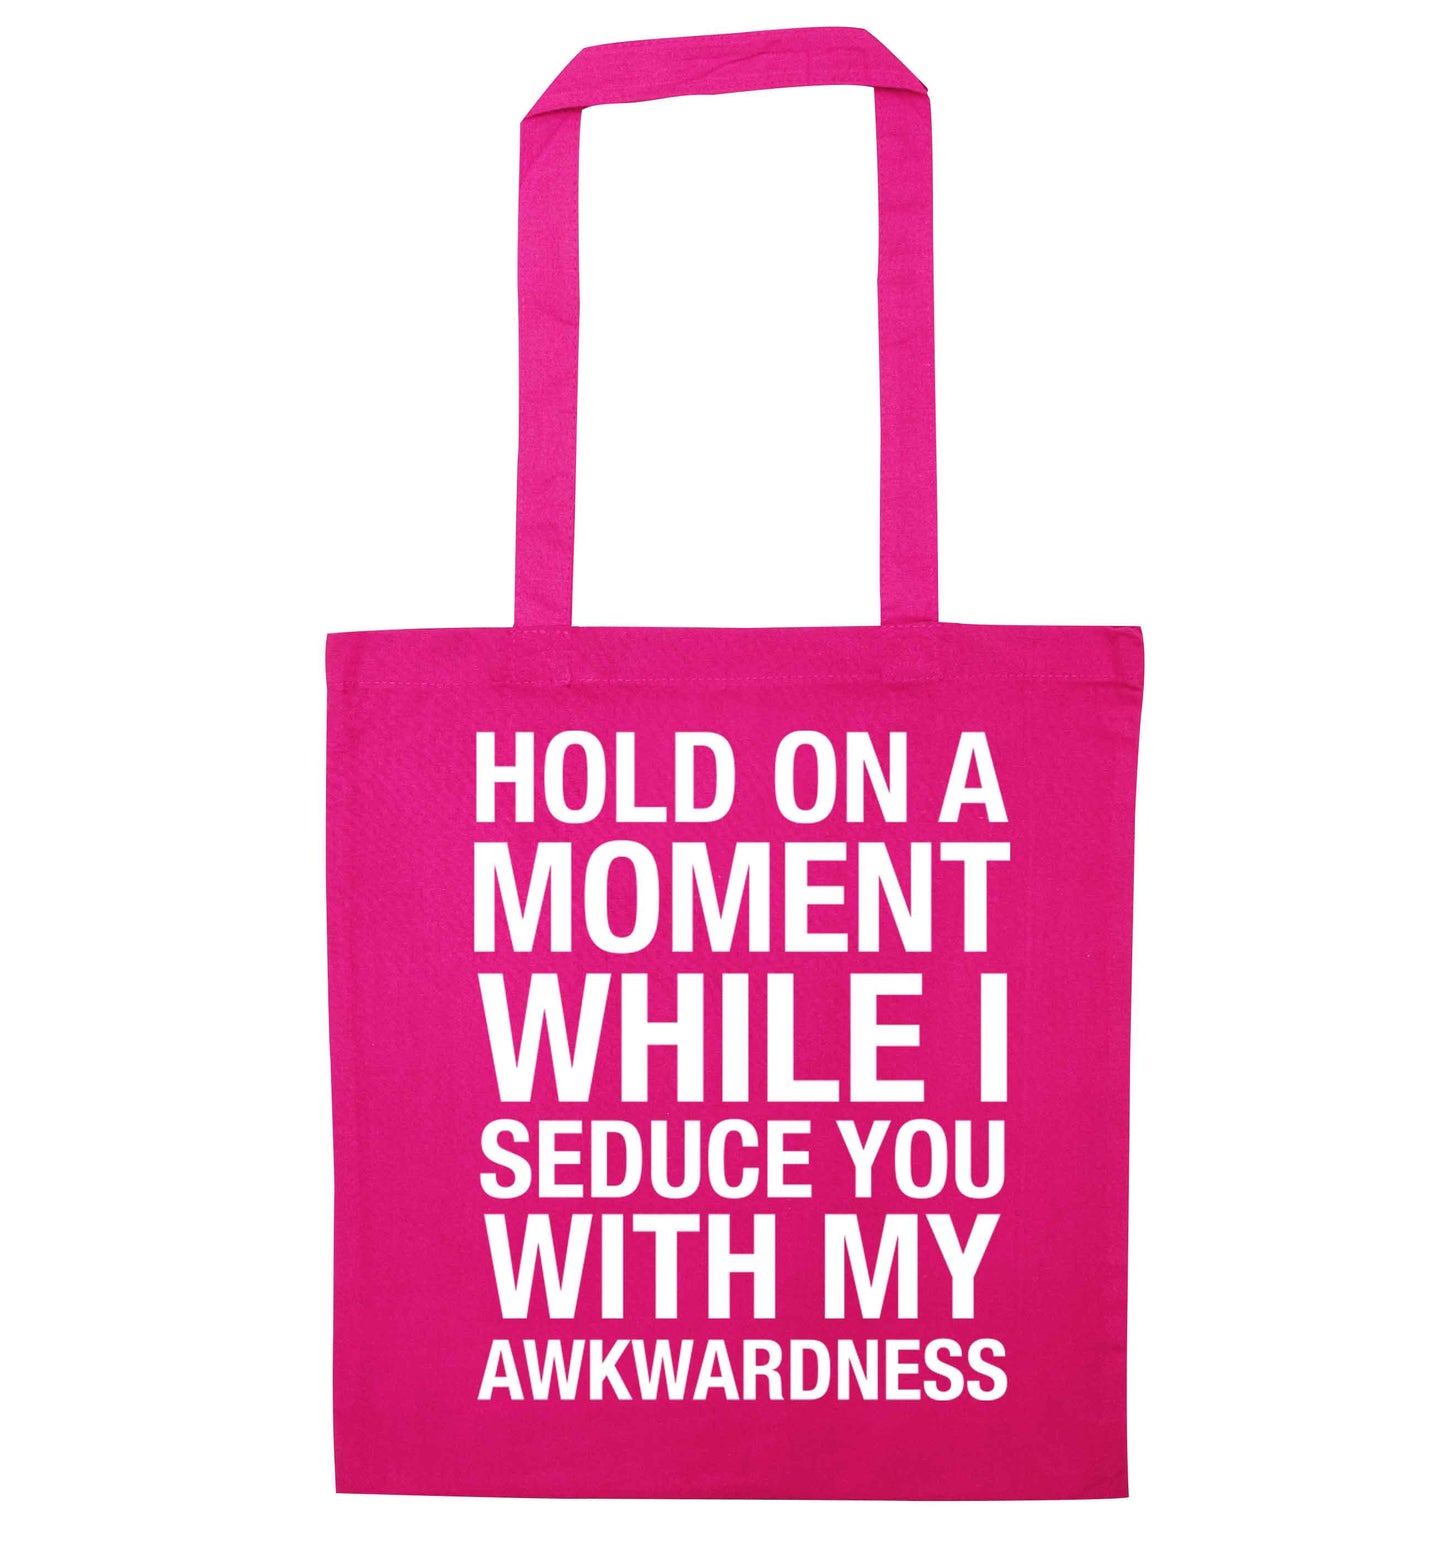 Hold on a moment while I seduce you with my awkwardness pink tote bag